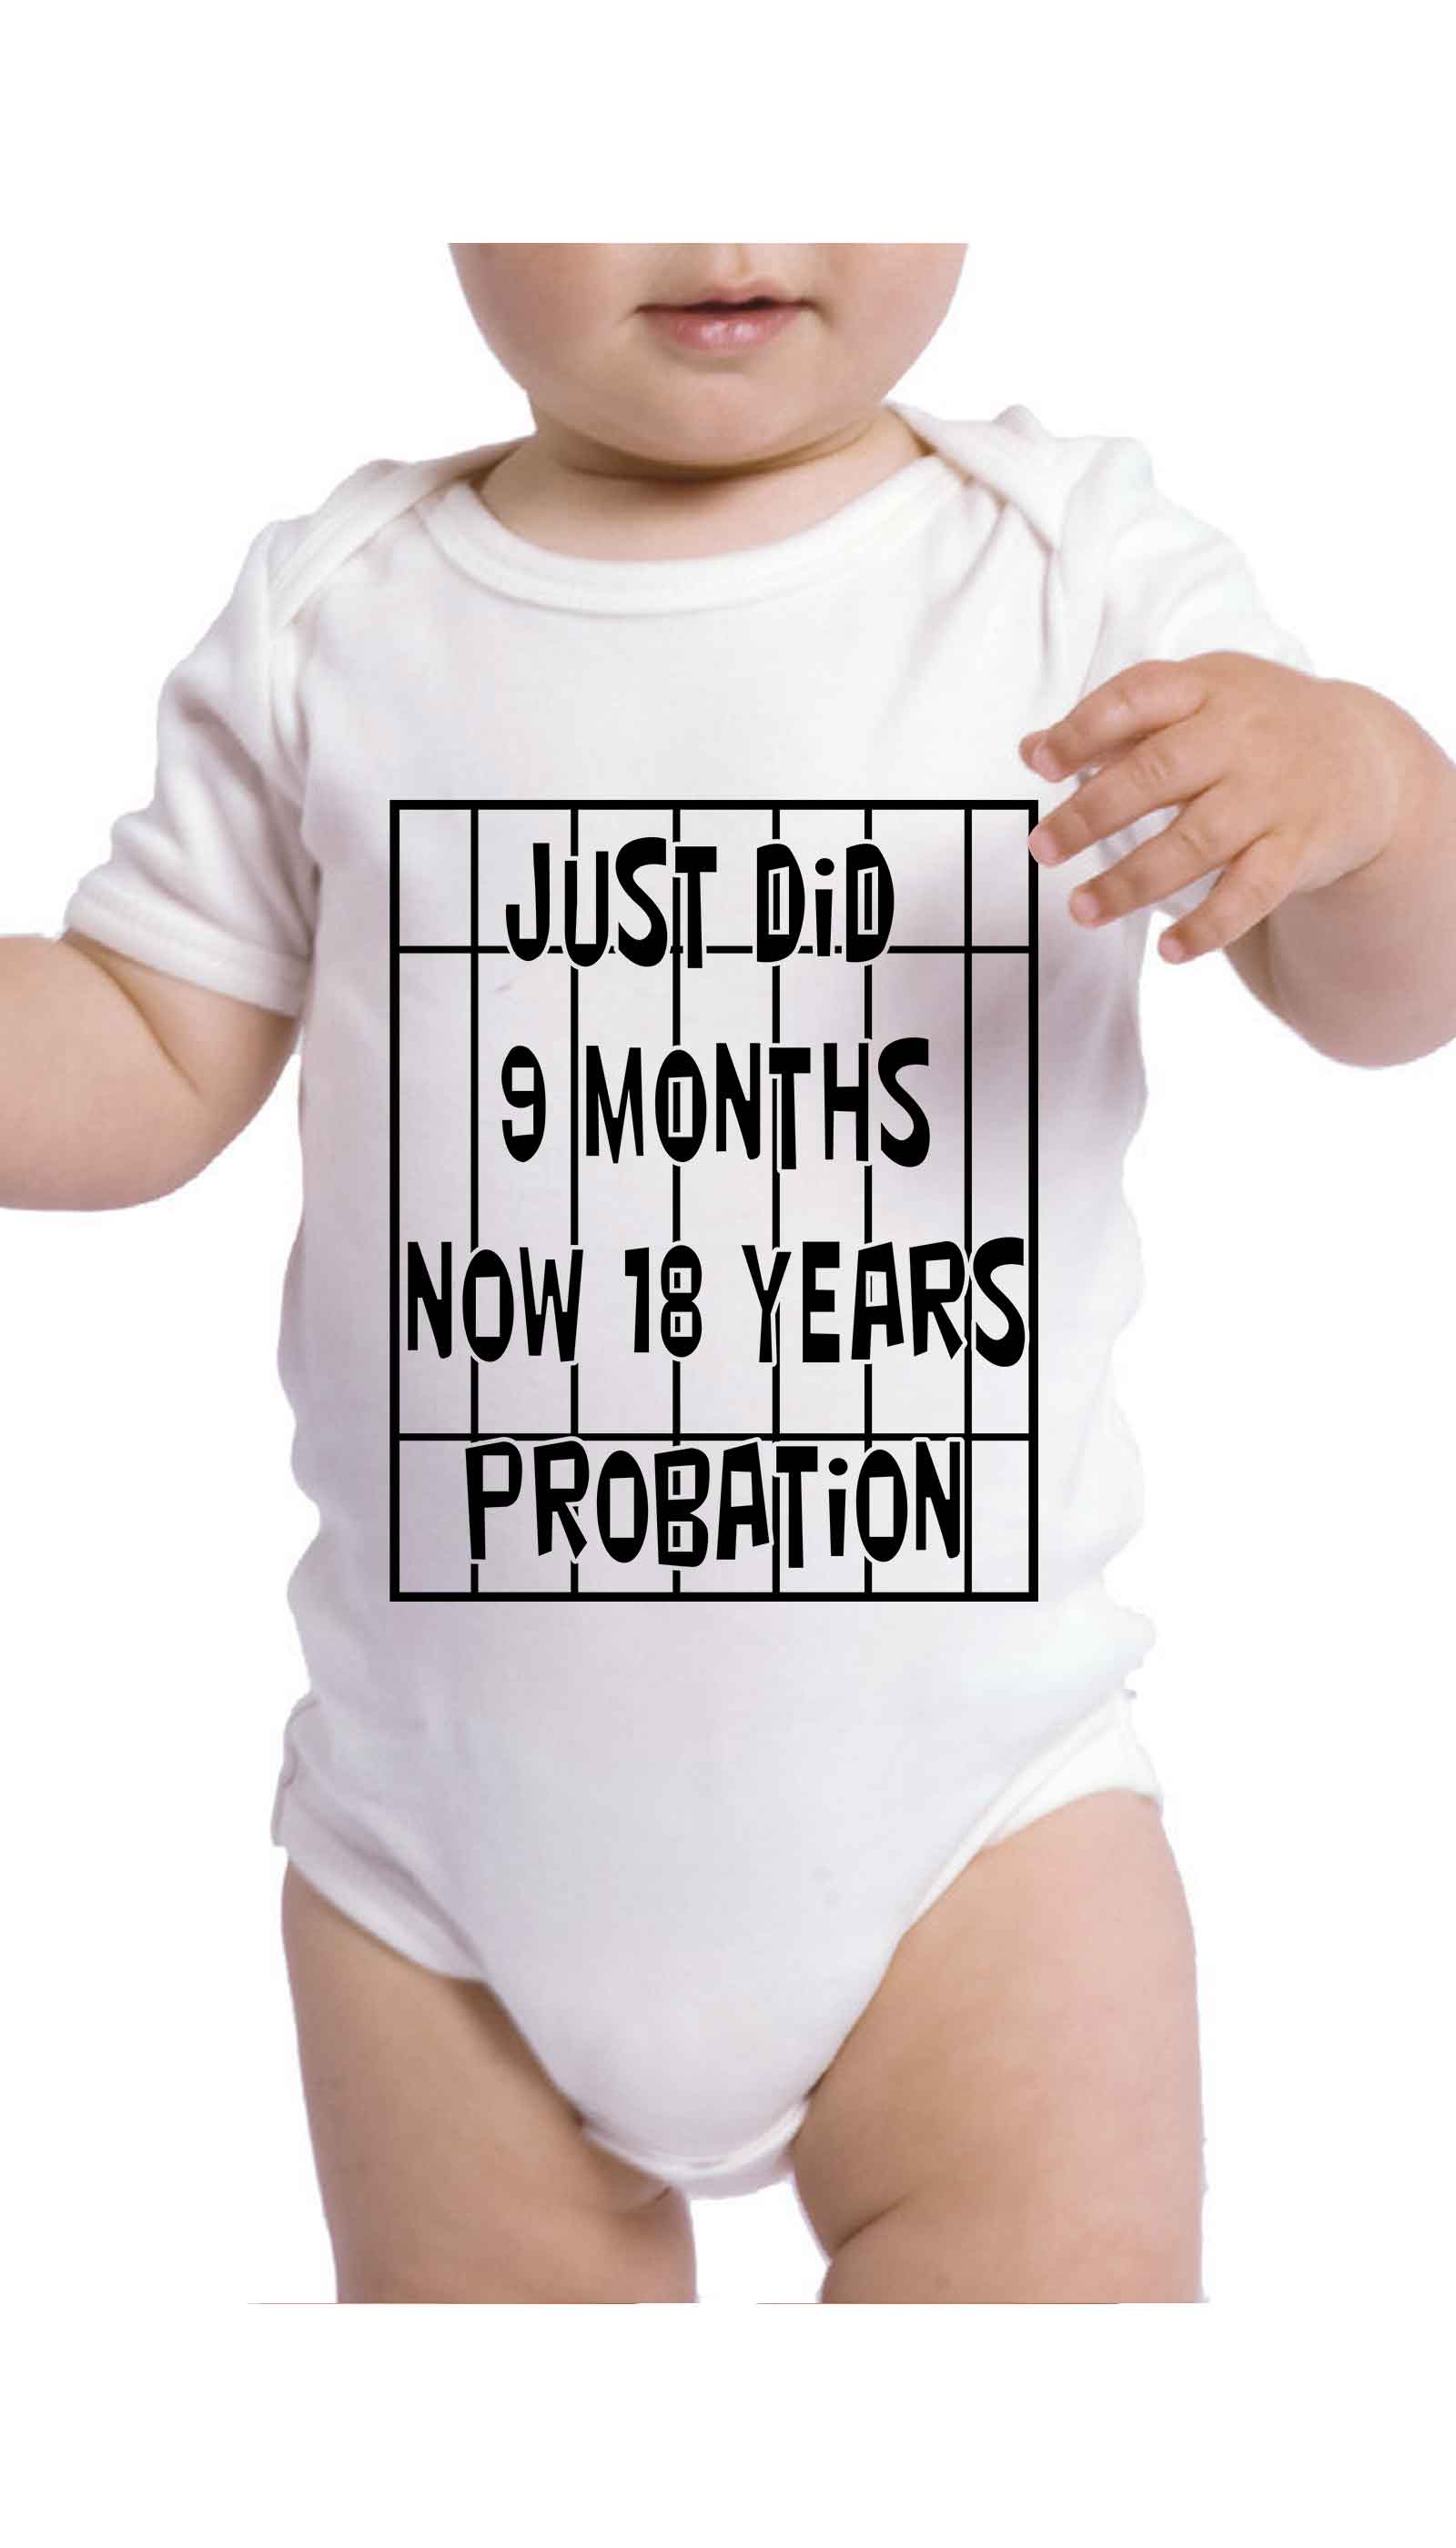 Just Did 9 Months Now 18 Years Probation Funny Baby Infant Onesie